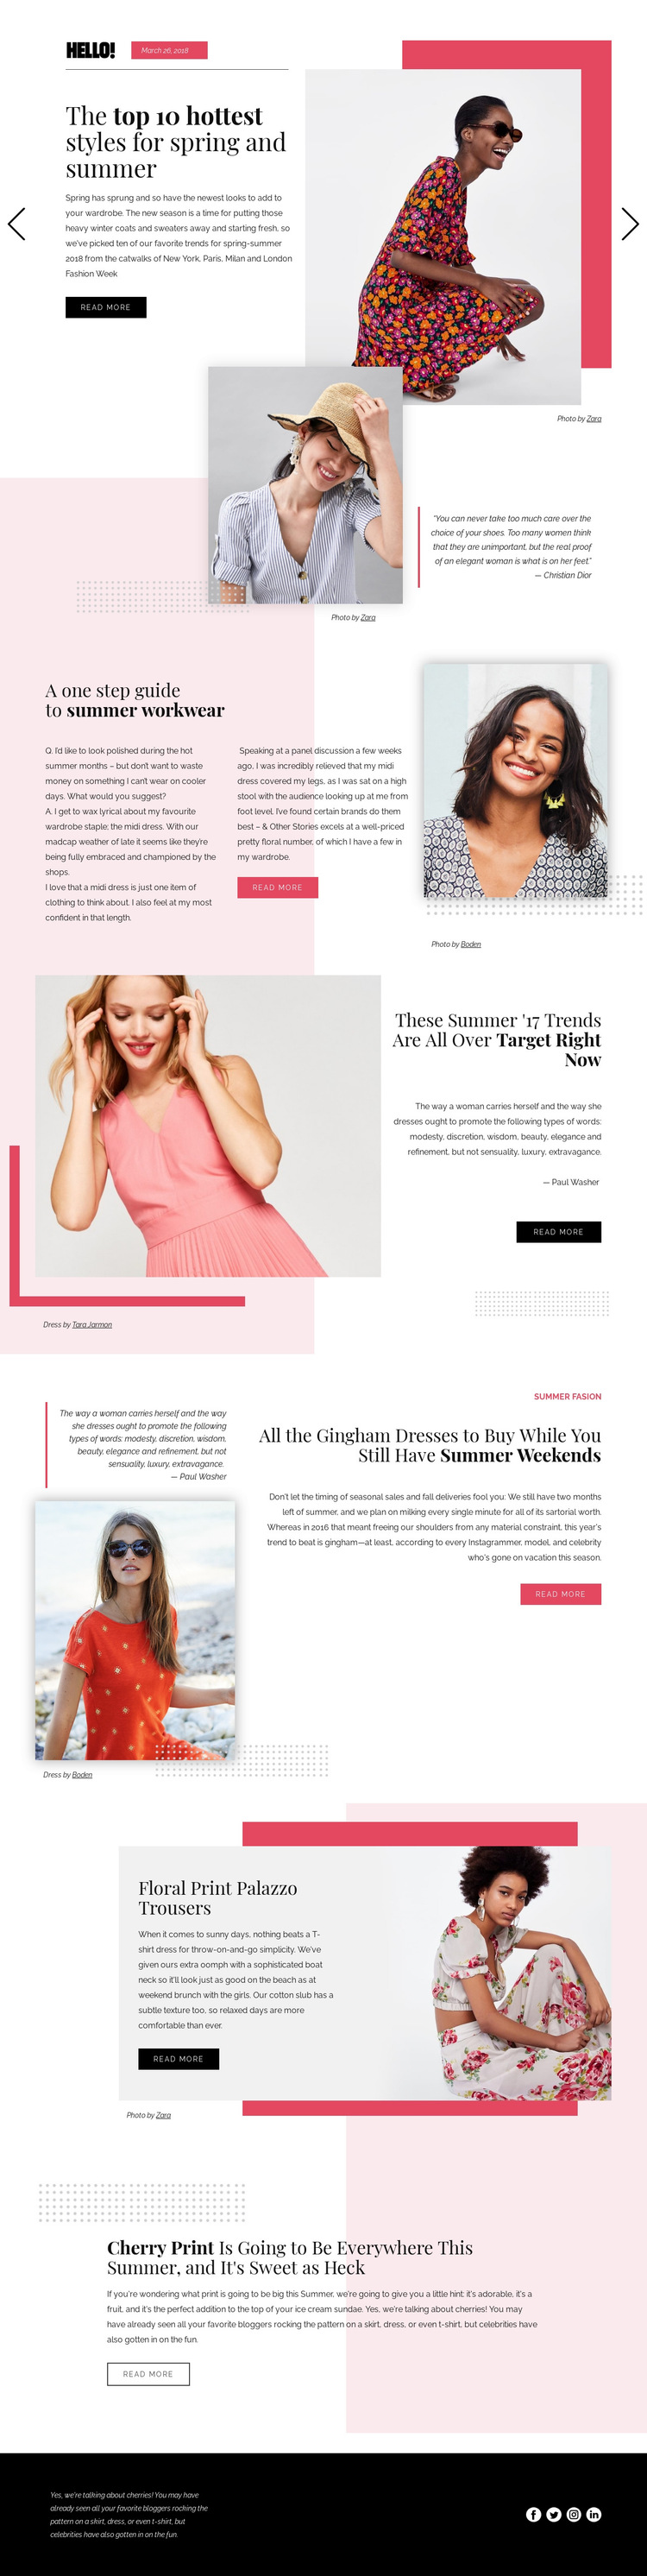 Fashion Trends HTML5 Template